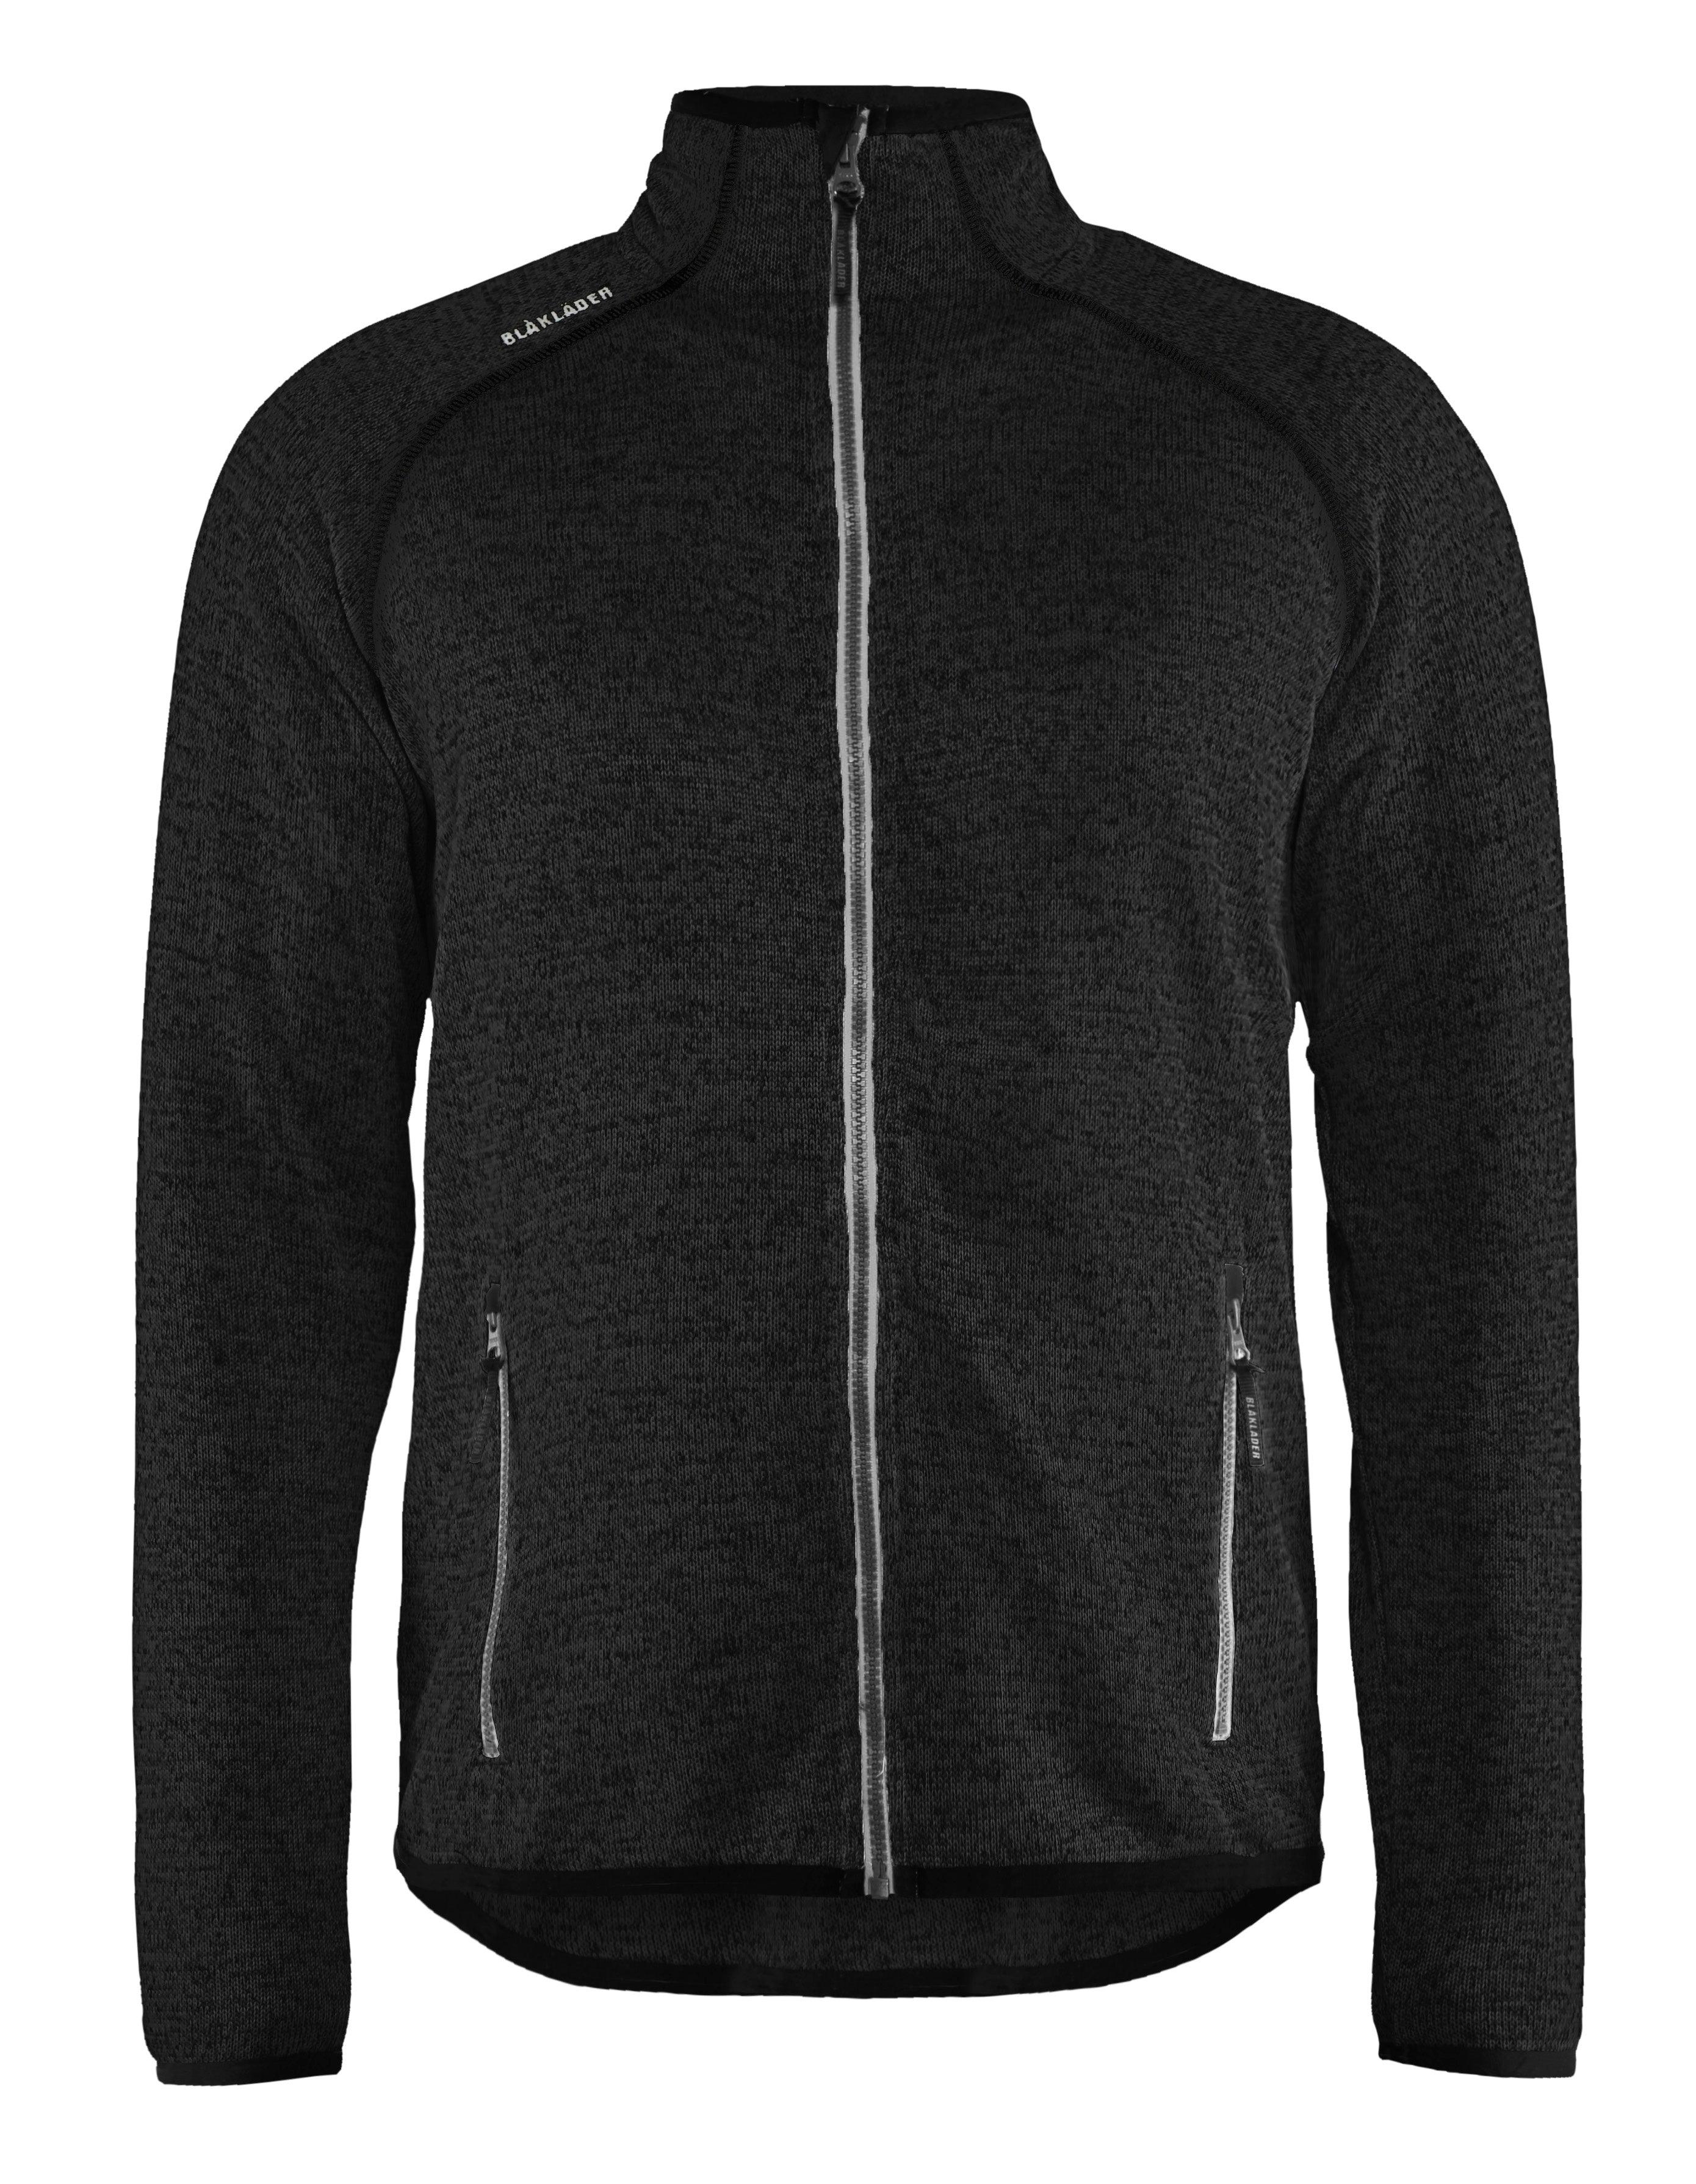 Blaklader 4965 Knitted Jacket - Anthracite Grey/White - Trusted Gear Company LLC